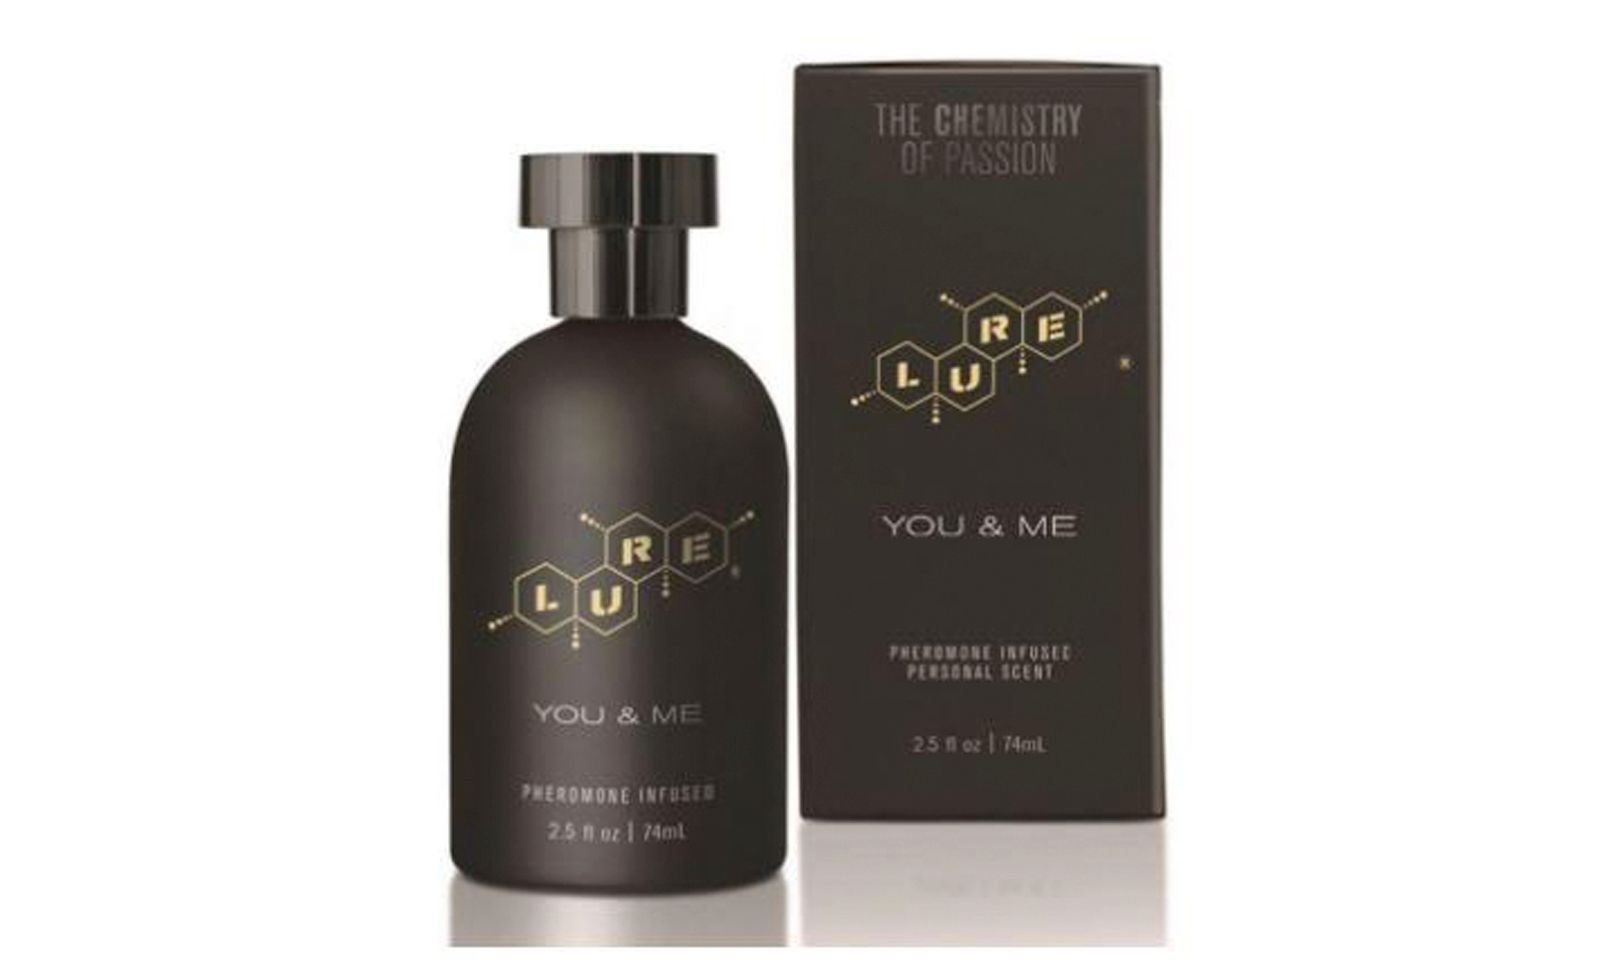 Lure Black Label Pheromone-Infused Fragrances Shipping From Topco Sales